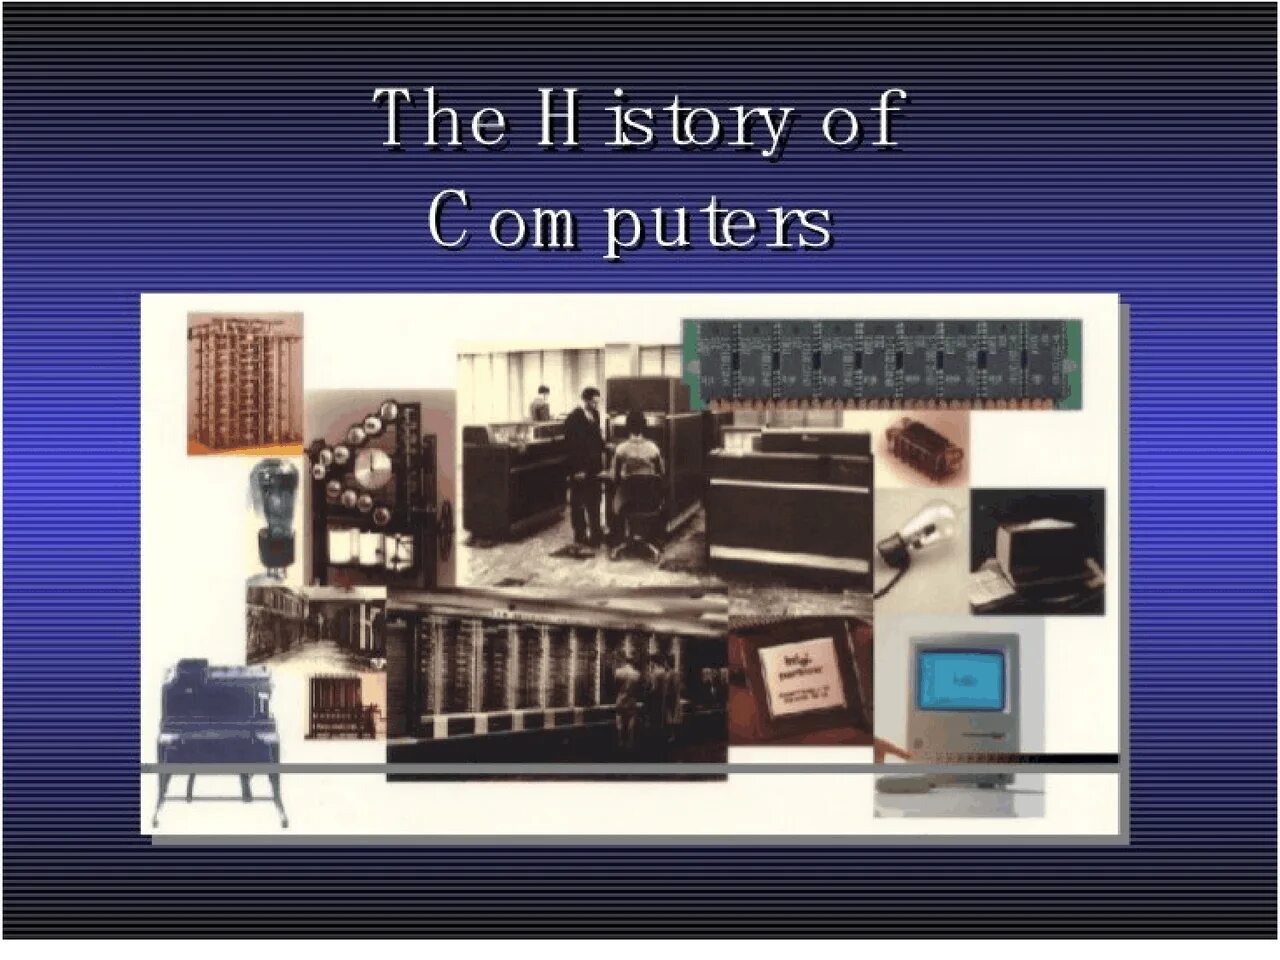 Computers were. History of Computers. Аналоговый компьютер. Computer Technology History. About Computers презентация.